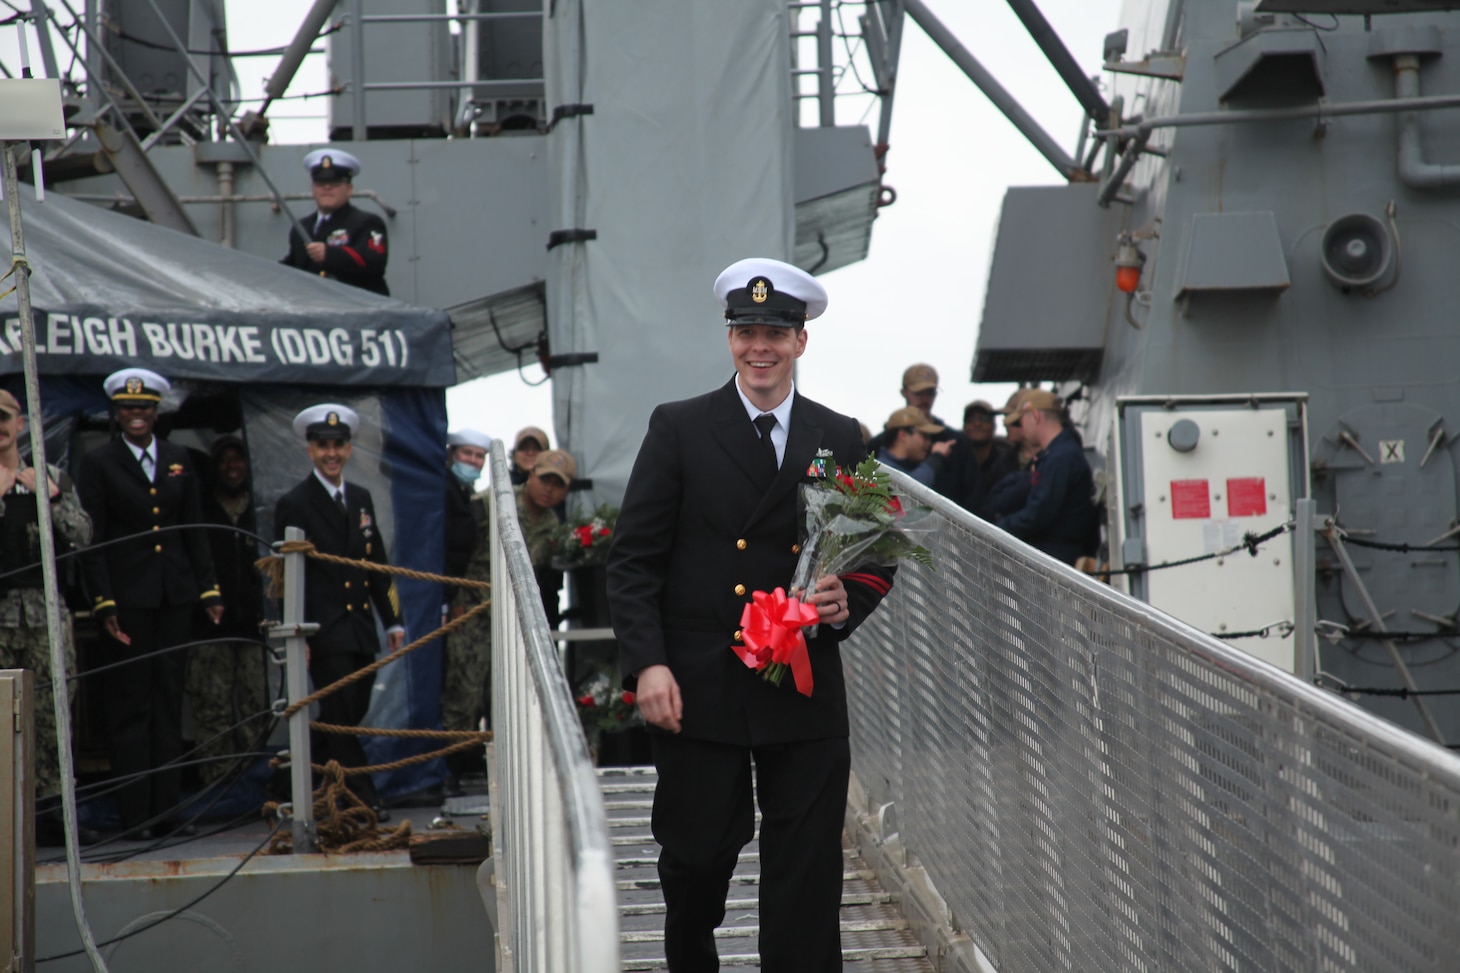 Chief Intelligence Specialist John Quinlan is first off the ship as he is greeted by family after the Arleigh Burke-class guided missile destroyer USS Arleigh Burke (DDG 51) returned to Rota, Spain, Dec. 23, 2021, completing her inaugural patrol as a member of the U.S. Navy’s Forward Deployed Naval Forces-Europe (FDNF-E). Arleigh Burke, forward-deployed to Rota, Spain, is on its first patrol in the U.S. Sixth Fleet area of operations in support of U.S. National Security Interests and regional allies and partners.